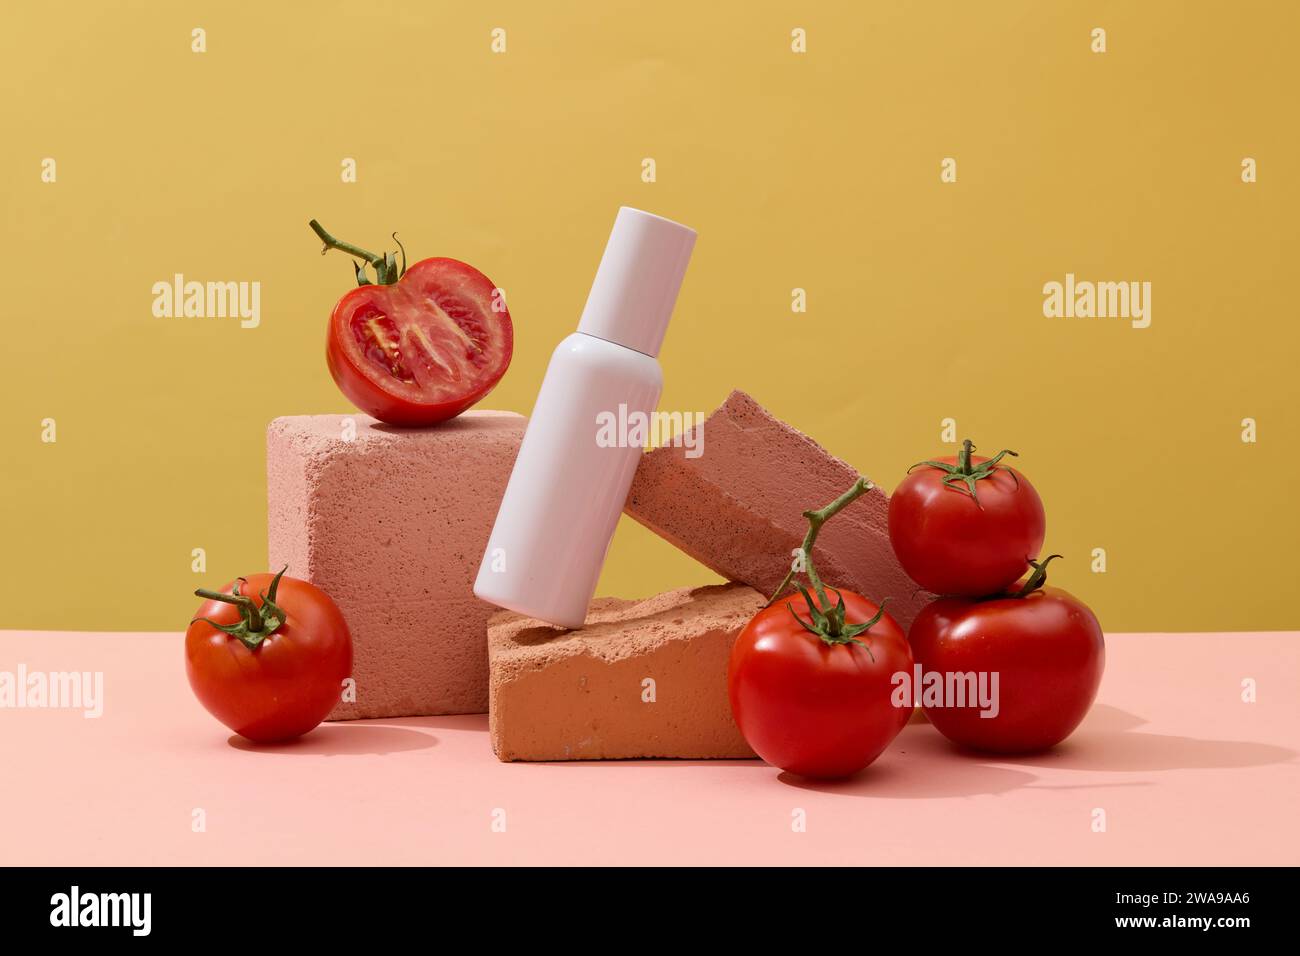 A skin care bottle with empty label arranged on several stones with red tomatoes. Yellow background. Tomatoes are low in calories and full of vital nu Stock Photo